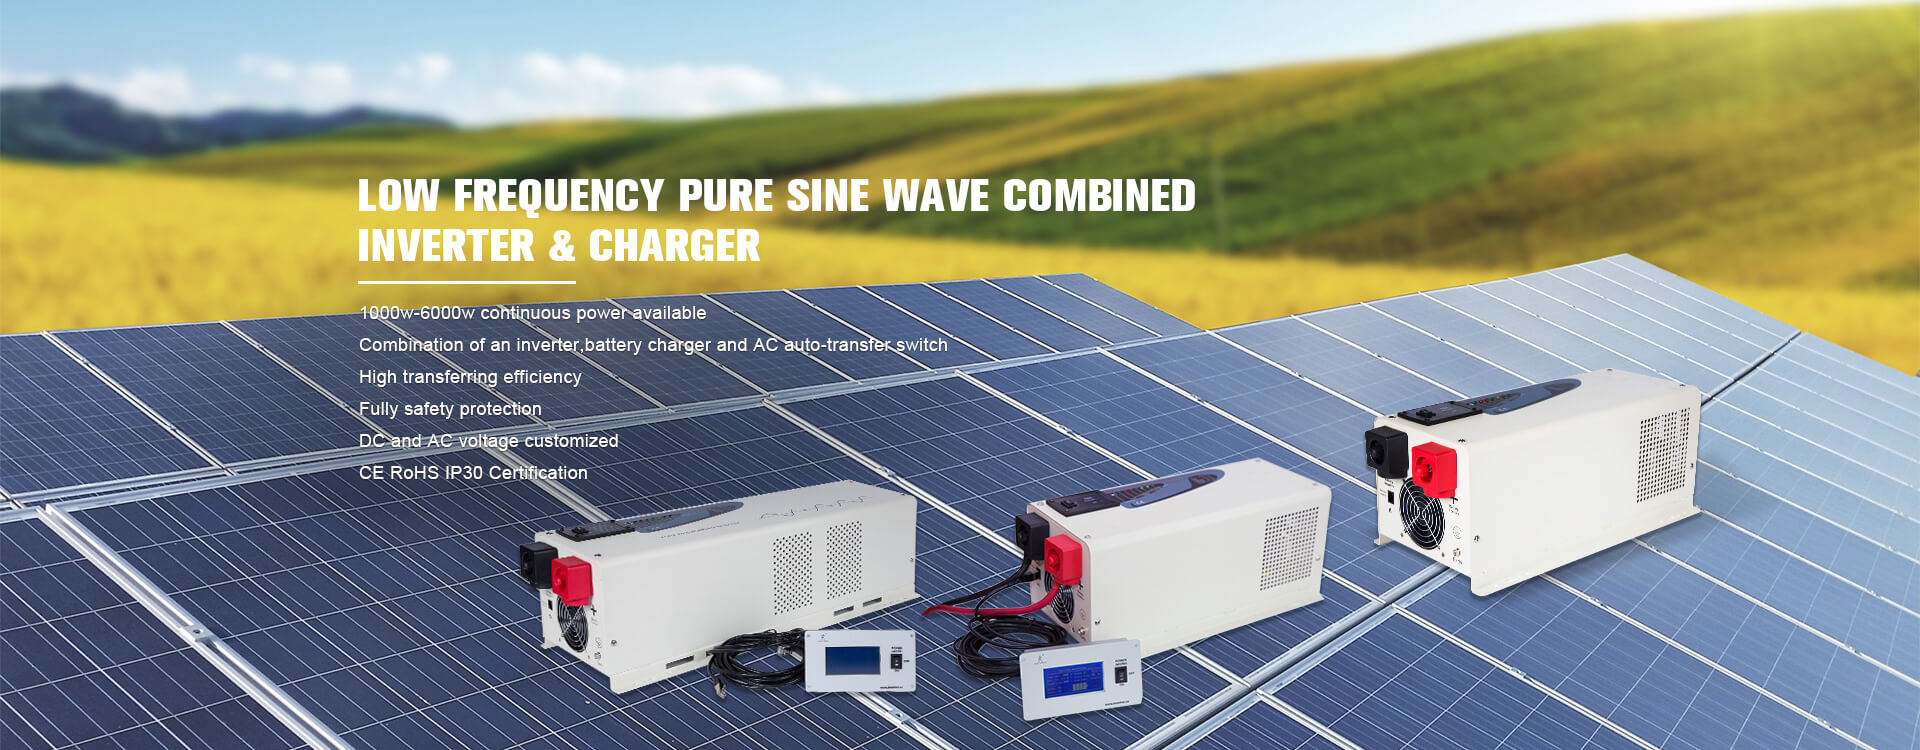 Low frequency pure sine wave conbined inverter with charger